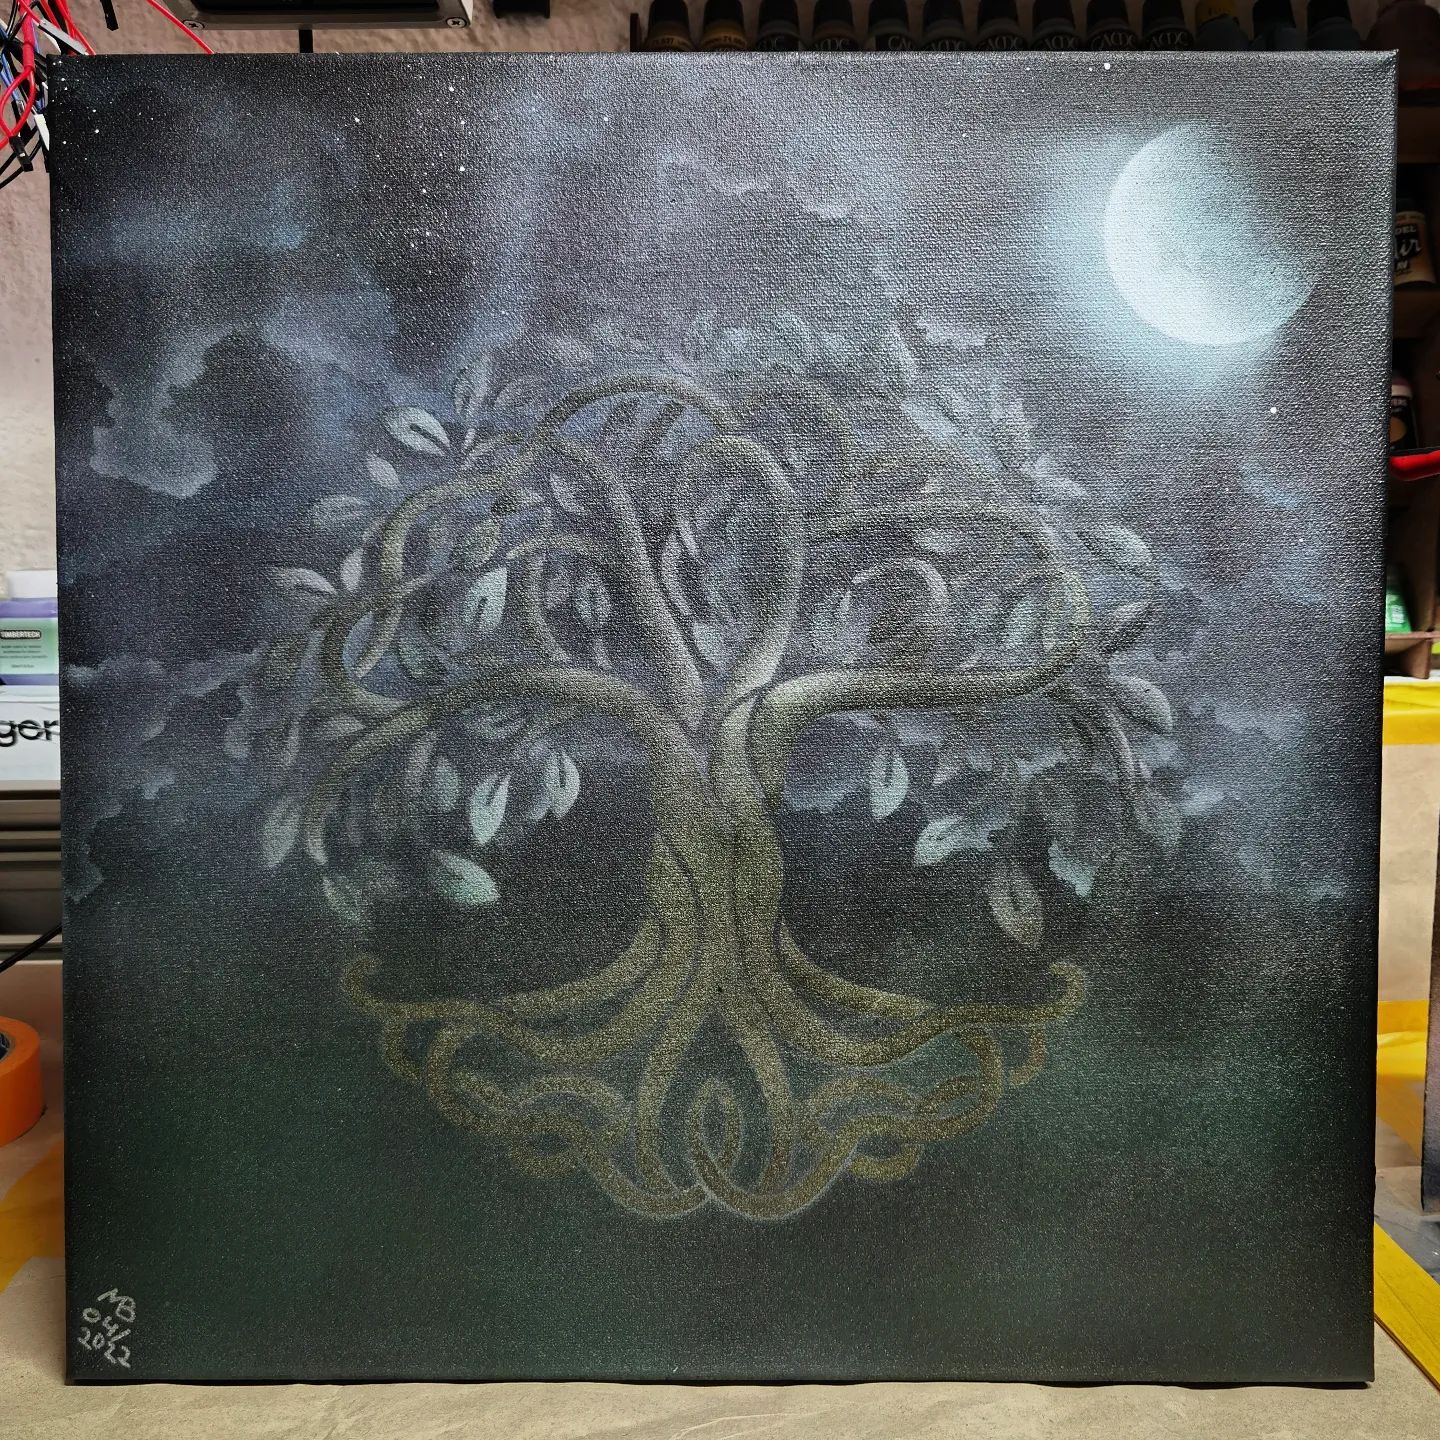 And another Yggdrasil finished. Doesn't look good on the photo. Panted with airbrush. For the Yggdrasil i used vallejo shifters in green blue violet for the leaves and brightgold brown for treetrunk and branches.  #yggdrasil #nordischemythologie #treeoflife #lebensbaum #nordicmythology #vikingart #vikings #airbrush #airbrushart #airbrushing #vallejo #theshifters #art #kunst #diy #creative #mystic #mystisch #norsemythology